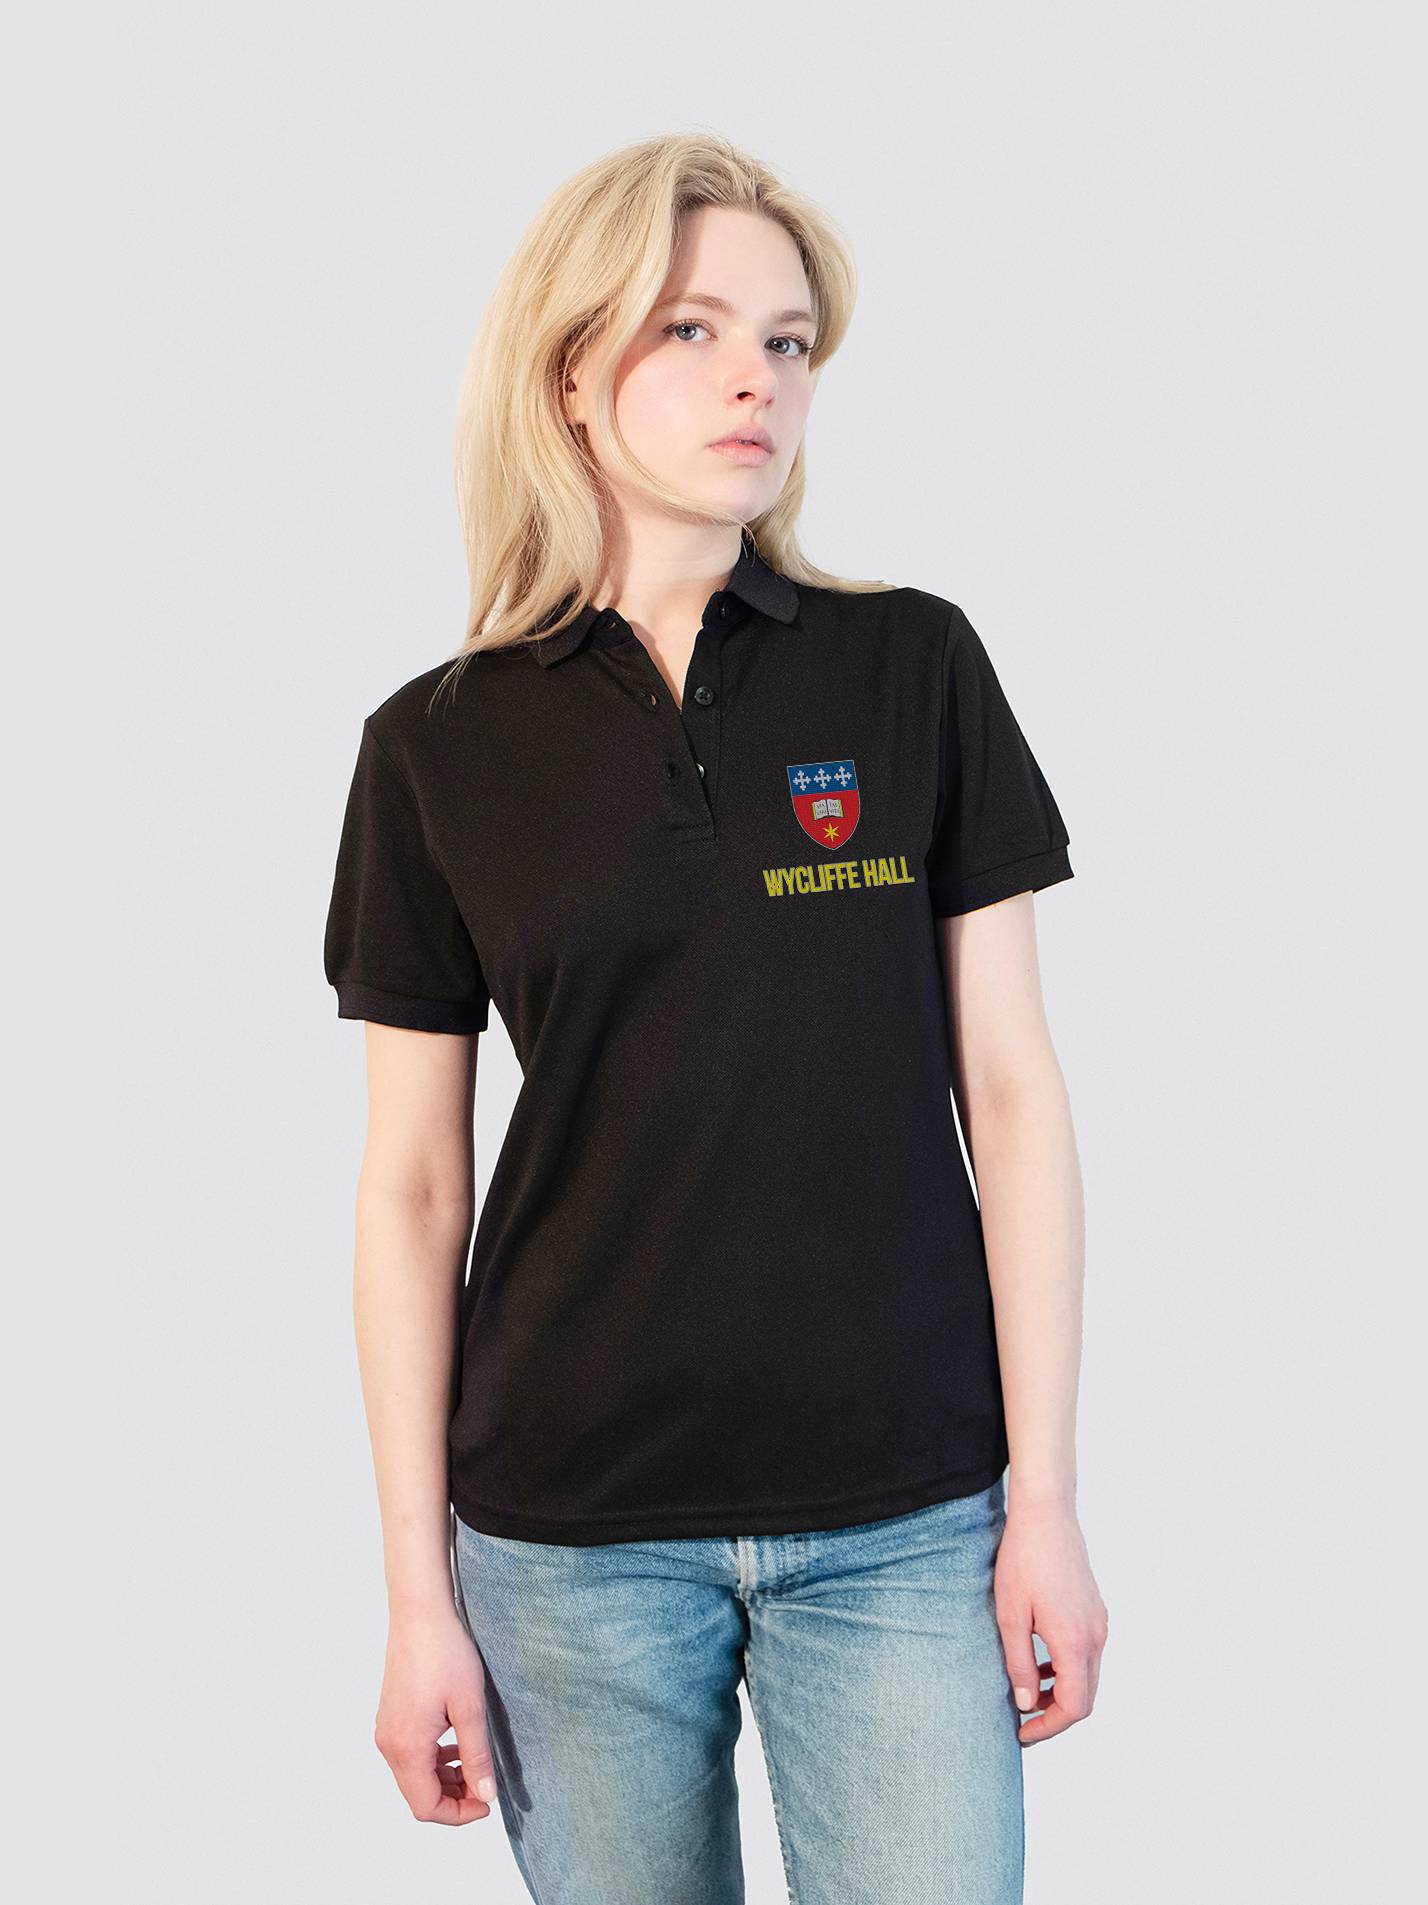 Wycliffe Hall Oxford Sustainable Ladies Polo Shirt